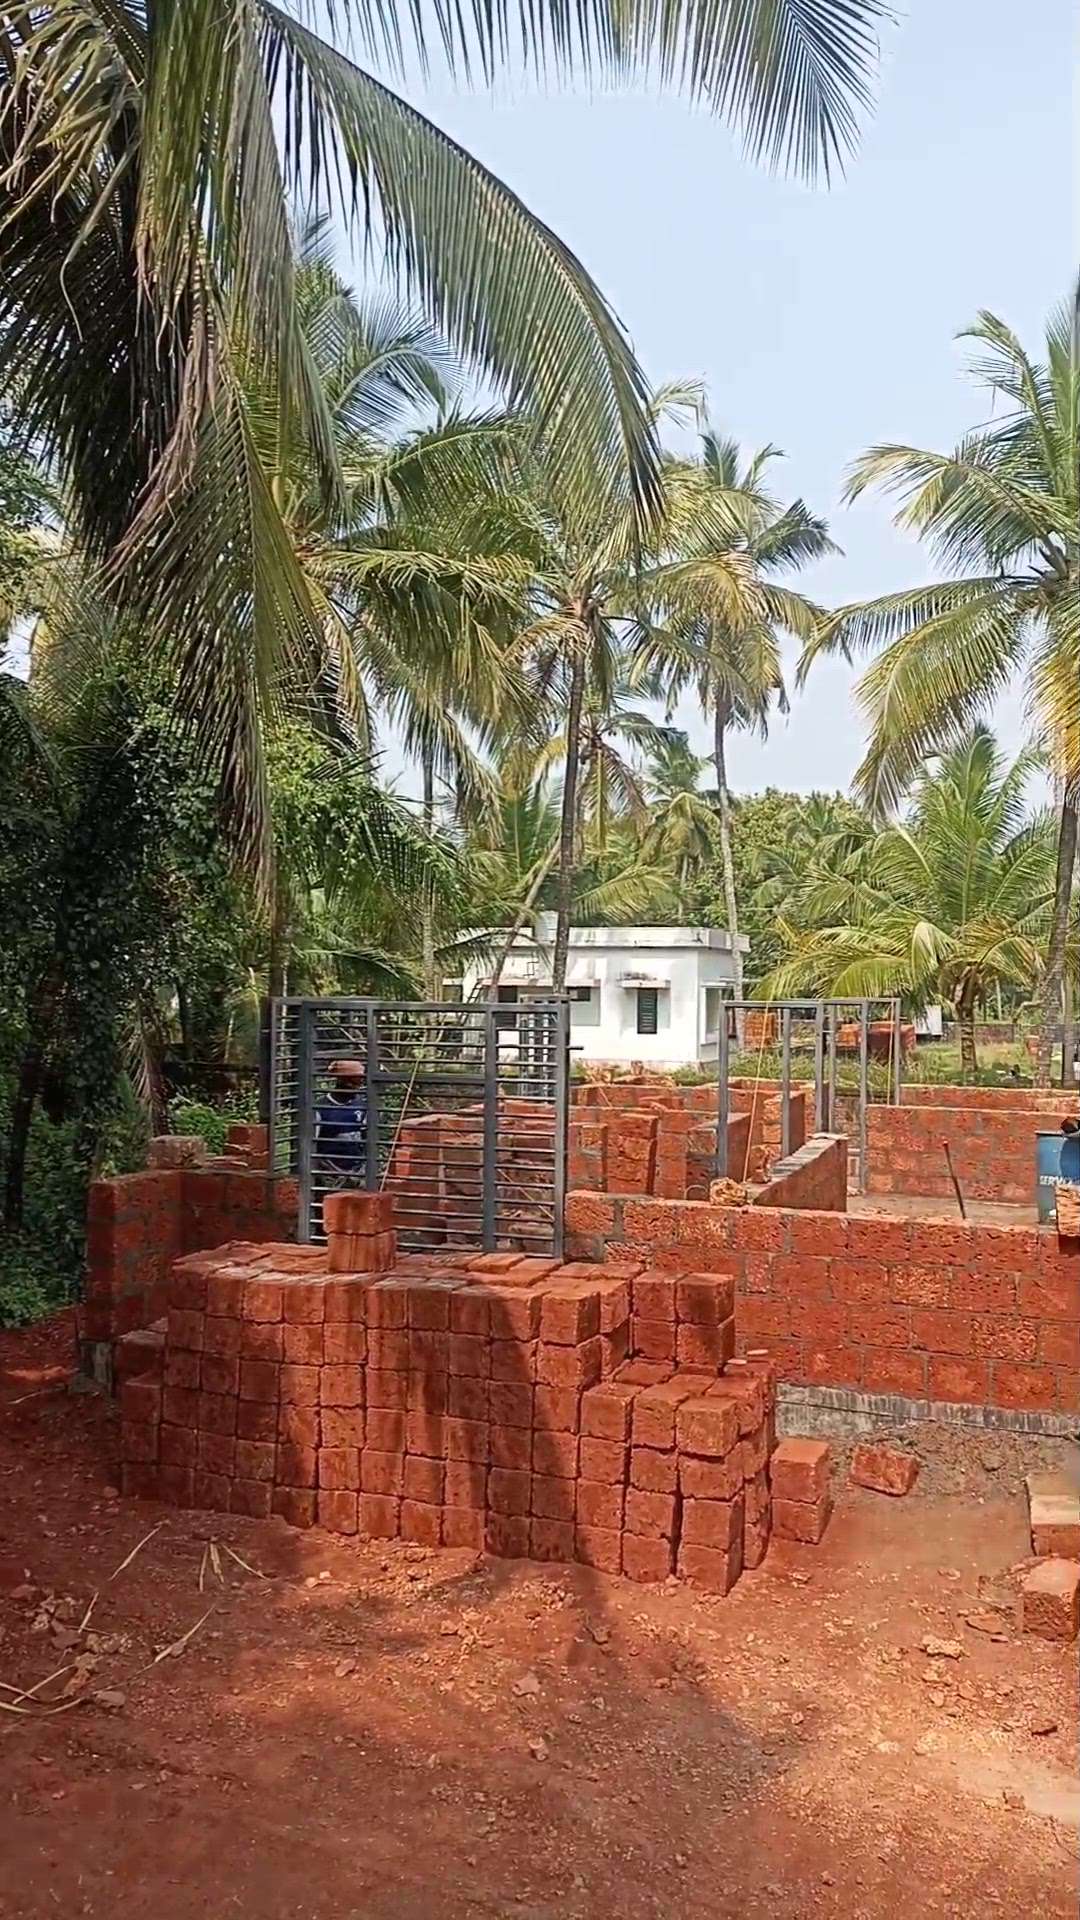 structure work
 #homecostruction  #structualdesign  #HouseDesigns  #homedecoration  #constructionsite  #HouseDesigns  #50LakhHouse  #4BHKPlans  #Designs  #Architect #CivilEngineer  #civilconstruction  #ElevationHome  #Buildind  #ContemporaryHouse  #HouseConstruction